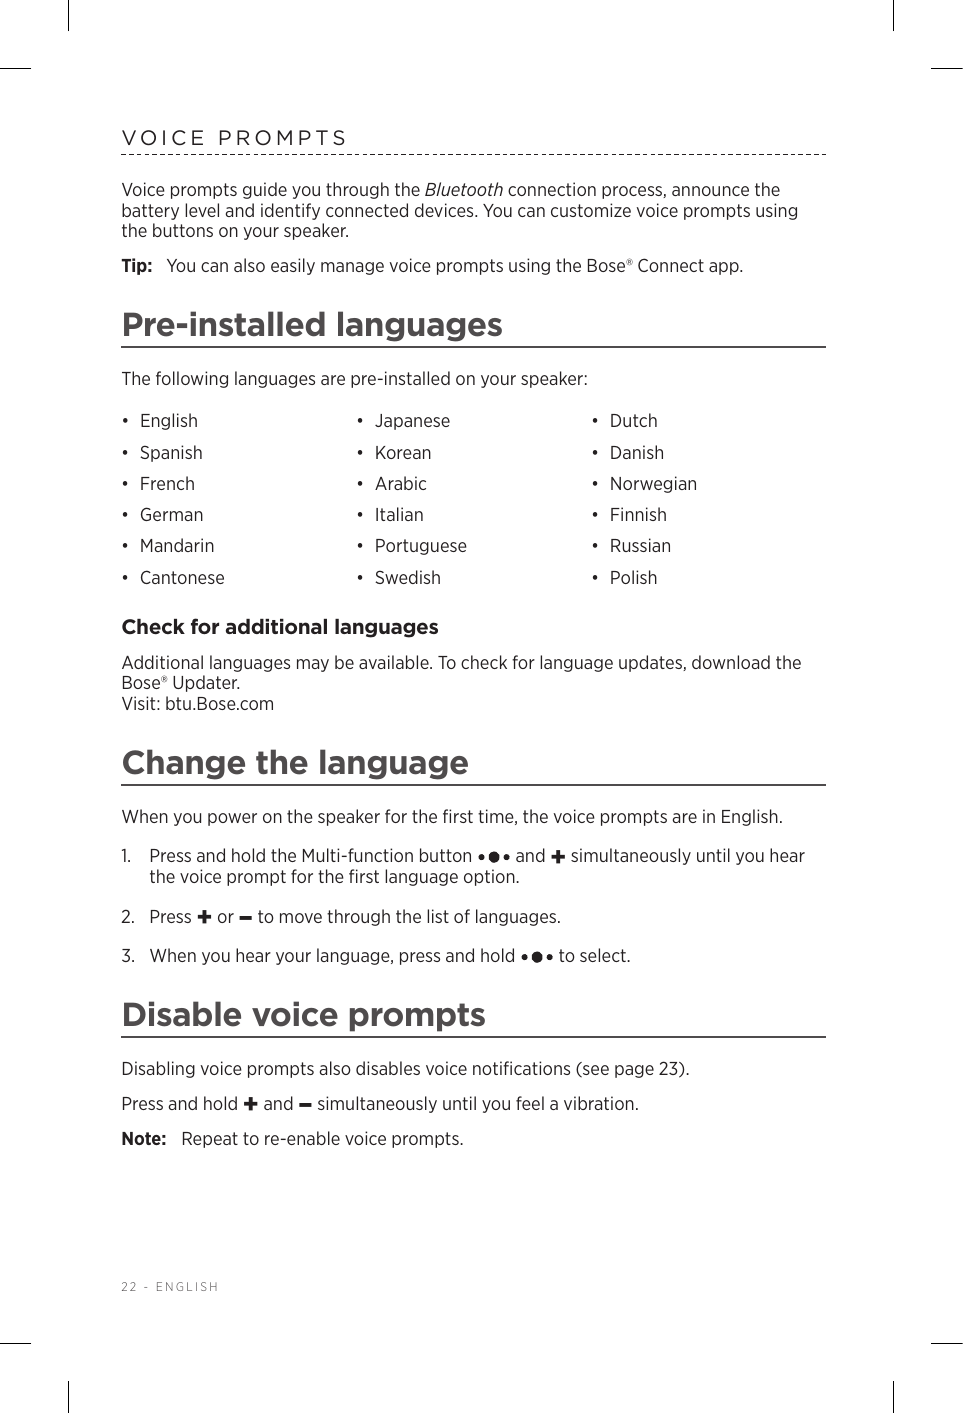 22 - ENGLISHVOICE PROMPTSVoice prompts guide you through the Bluetooth connection process, announce the battery level and identify connected devices. You can customize voice prompts using the buttons on your speaker.Tip:  You can also easily manage voice prompts using the Bose® Connect app.Pre-installed languagesThe following languages are pre-installed on your speaker:•  English •  Japanese •  Dutch•  Spanish •  Korean •  Danish•  French •  Arabic •  Norwegian•  German •  Italian •  Finnish•  Mandarin •  Portuguese •  Russian•  Cantonese •  Swedish •  PolishCheck for additional languagesAdditional languages may be available. To check for language updates, download the Bose® Updater.  Visit: btu.Bose.comChange the languageWhen you power on the speaker for the ﬁrst time, the voice prompts are in English. 1.   Press and hold the Multi-function button   and + simultaneously until you hear the voice prompt for the ﬁrst language option. 2.  Press + or – to move through the list of languages.3.   When you hear your language, press and hold   to select.Disable voice promptsDisabling voice prompts also disables voice notiﬁcations (see page 23).Press and hold + and – simultaneously until you feel a vibration. Note:  Repeat to re-enable voice prompts.